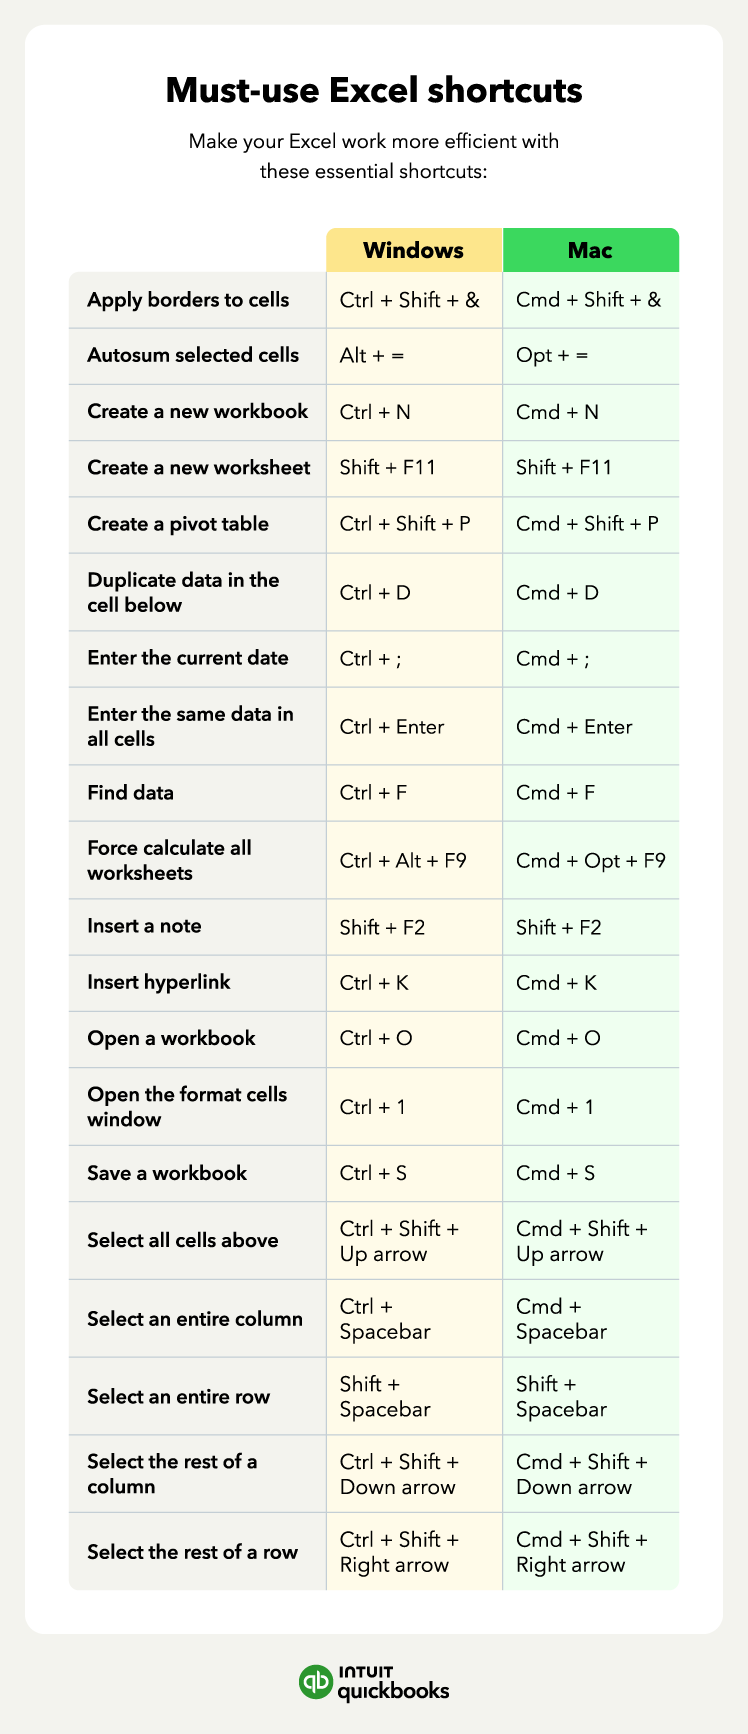 An image of the top Excel shortcuts.